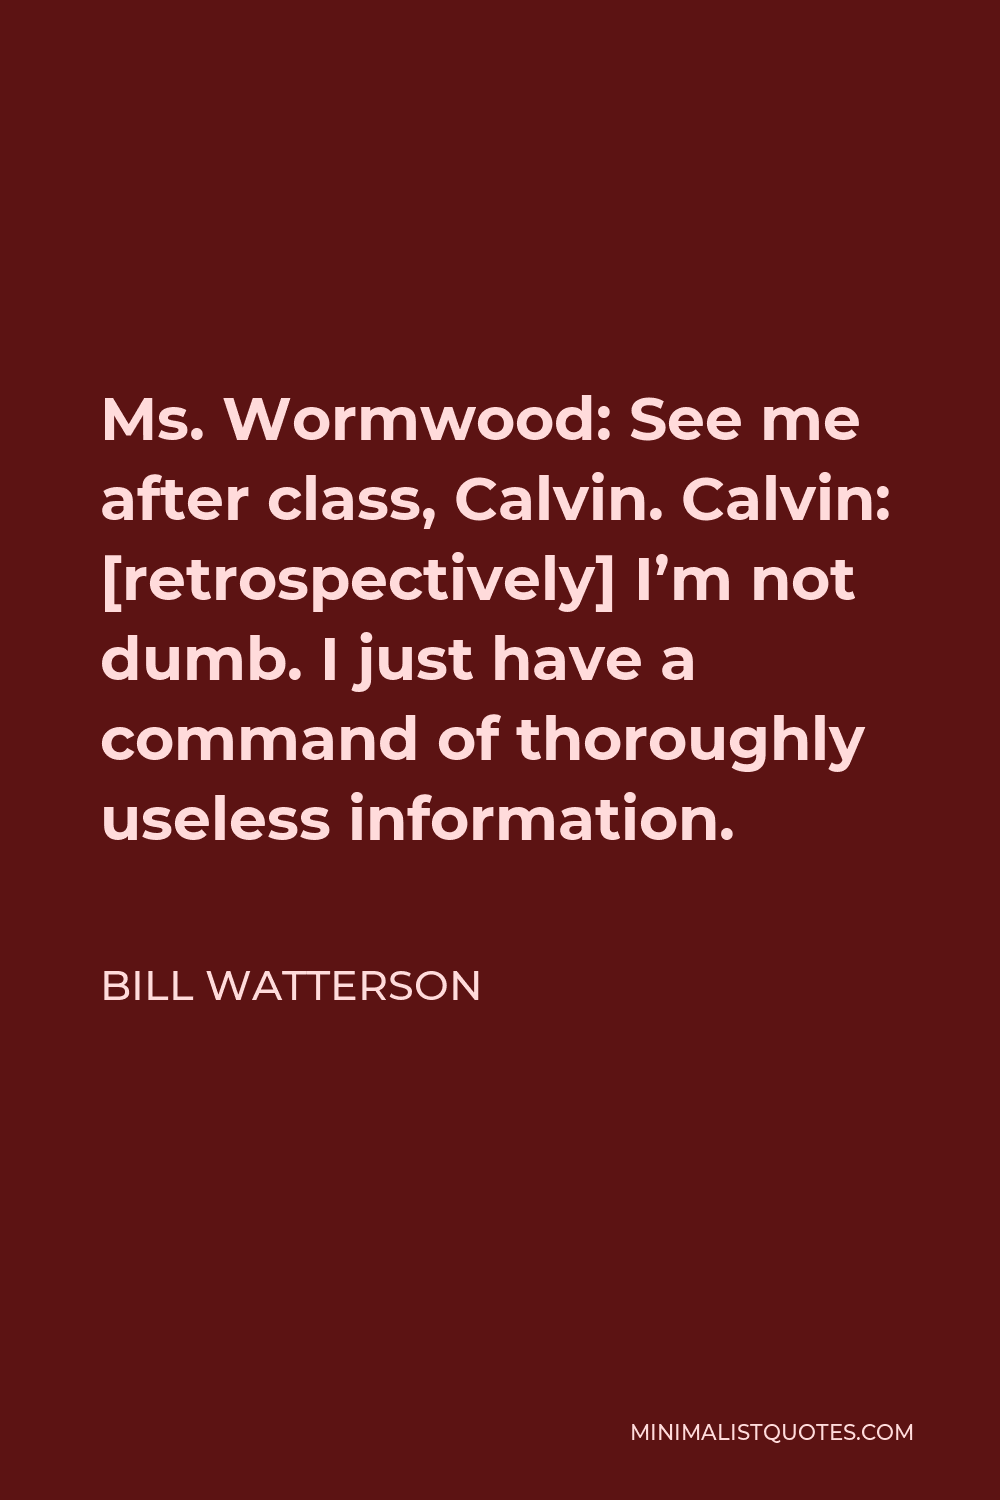 Bill Watterson Quote - Ms. Wormwood: See me after class, Calvin. Calvin: [retrospectively] I’m not dumb. I just have a command of thoroughly useless information.